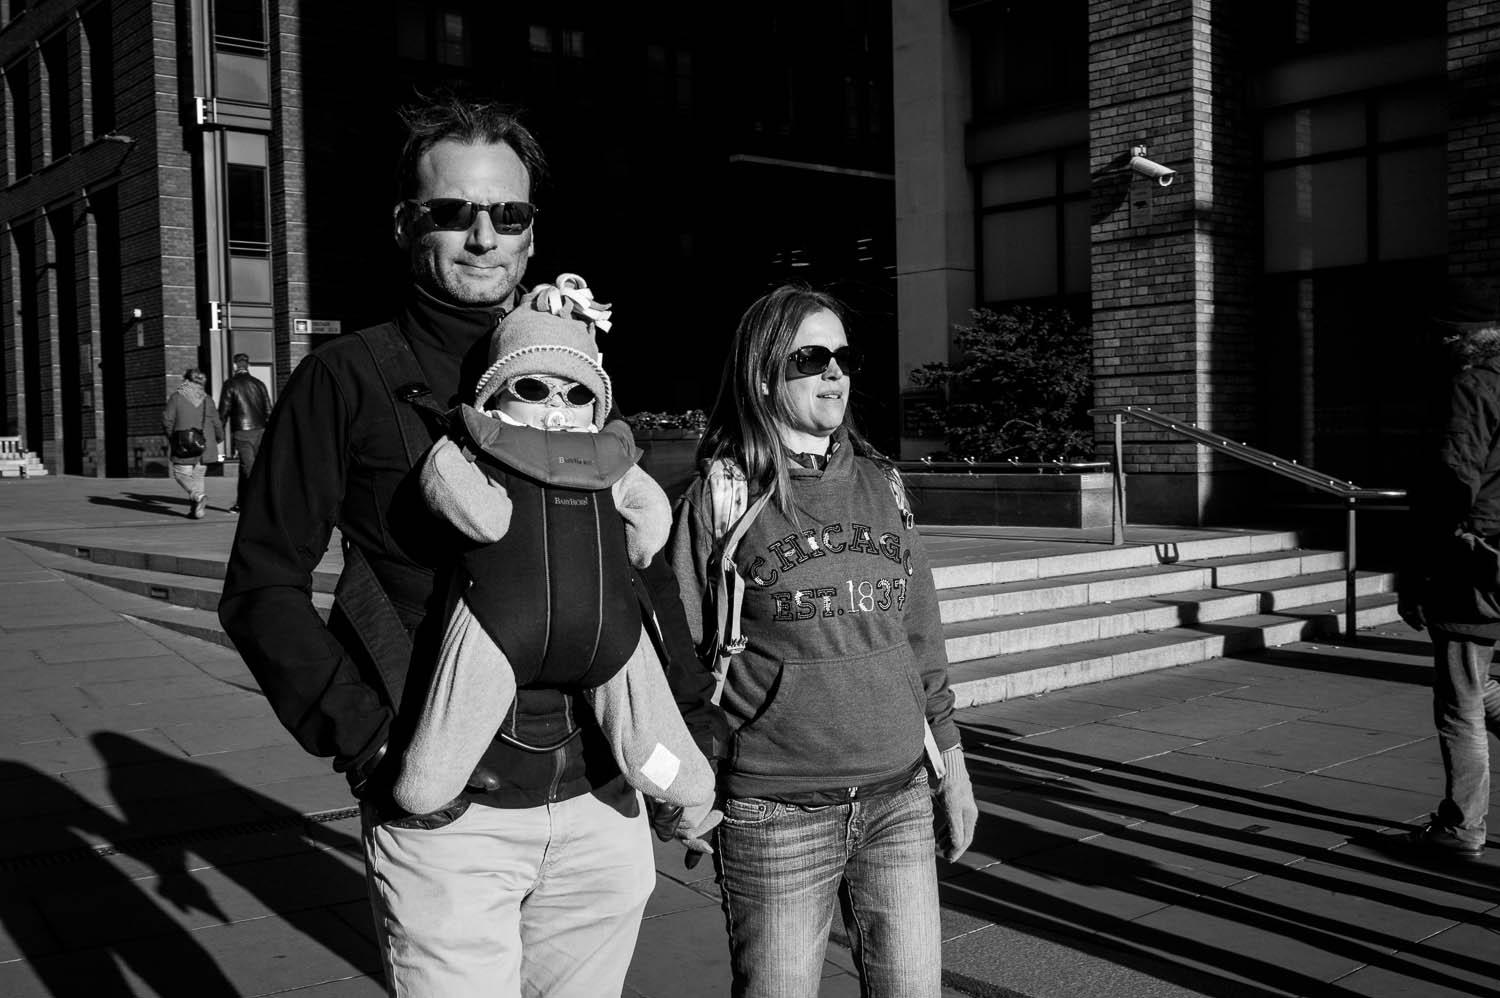 A couple with a baby carrier walk through London, all three wearing sunglasses